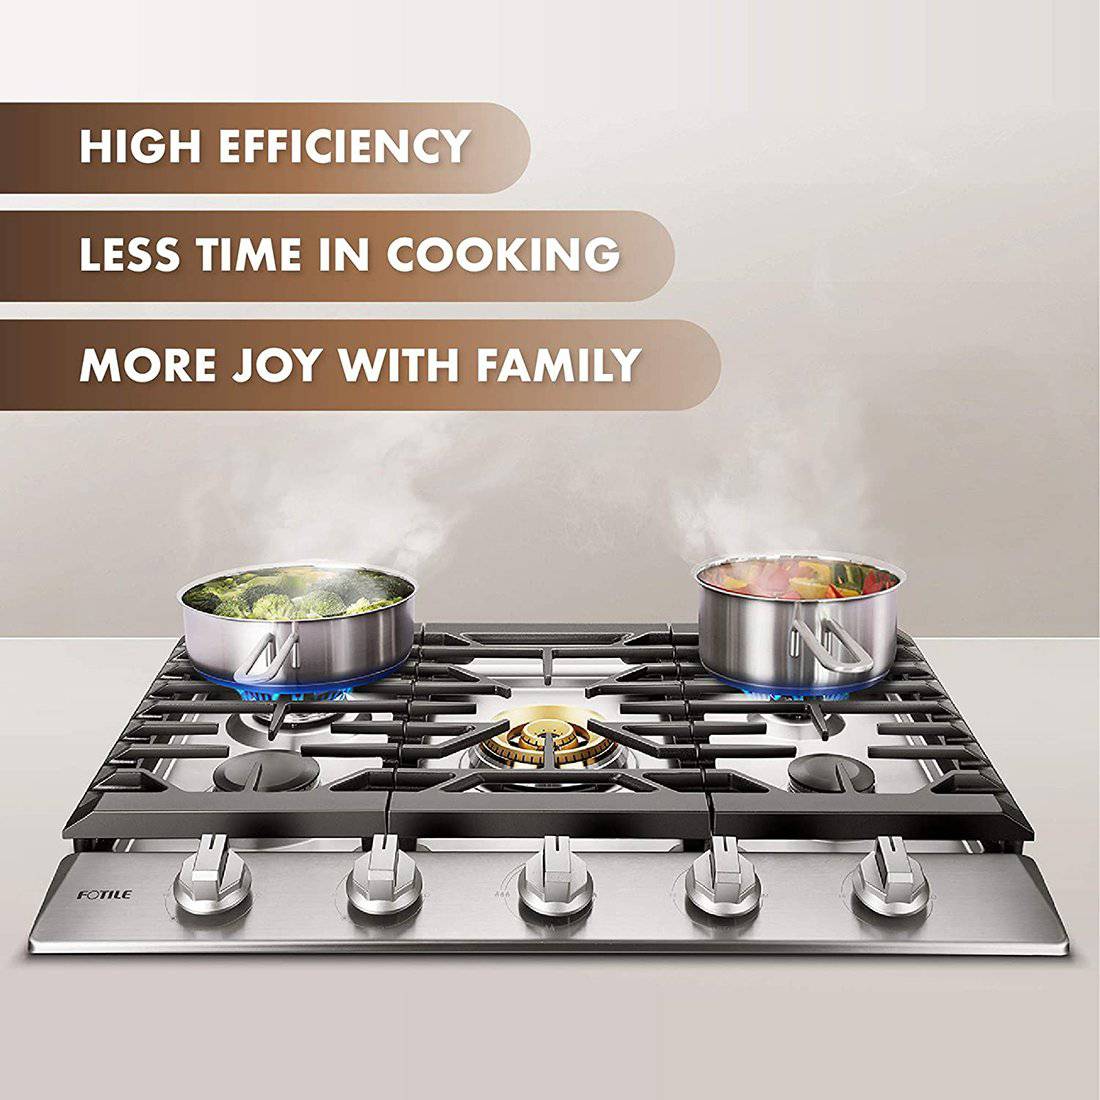 Kitchen Appliances Gas with Electric Stove with Flame-out Device - China  Gas with Electric Hobs and Cookware price